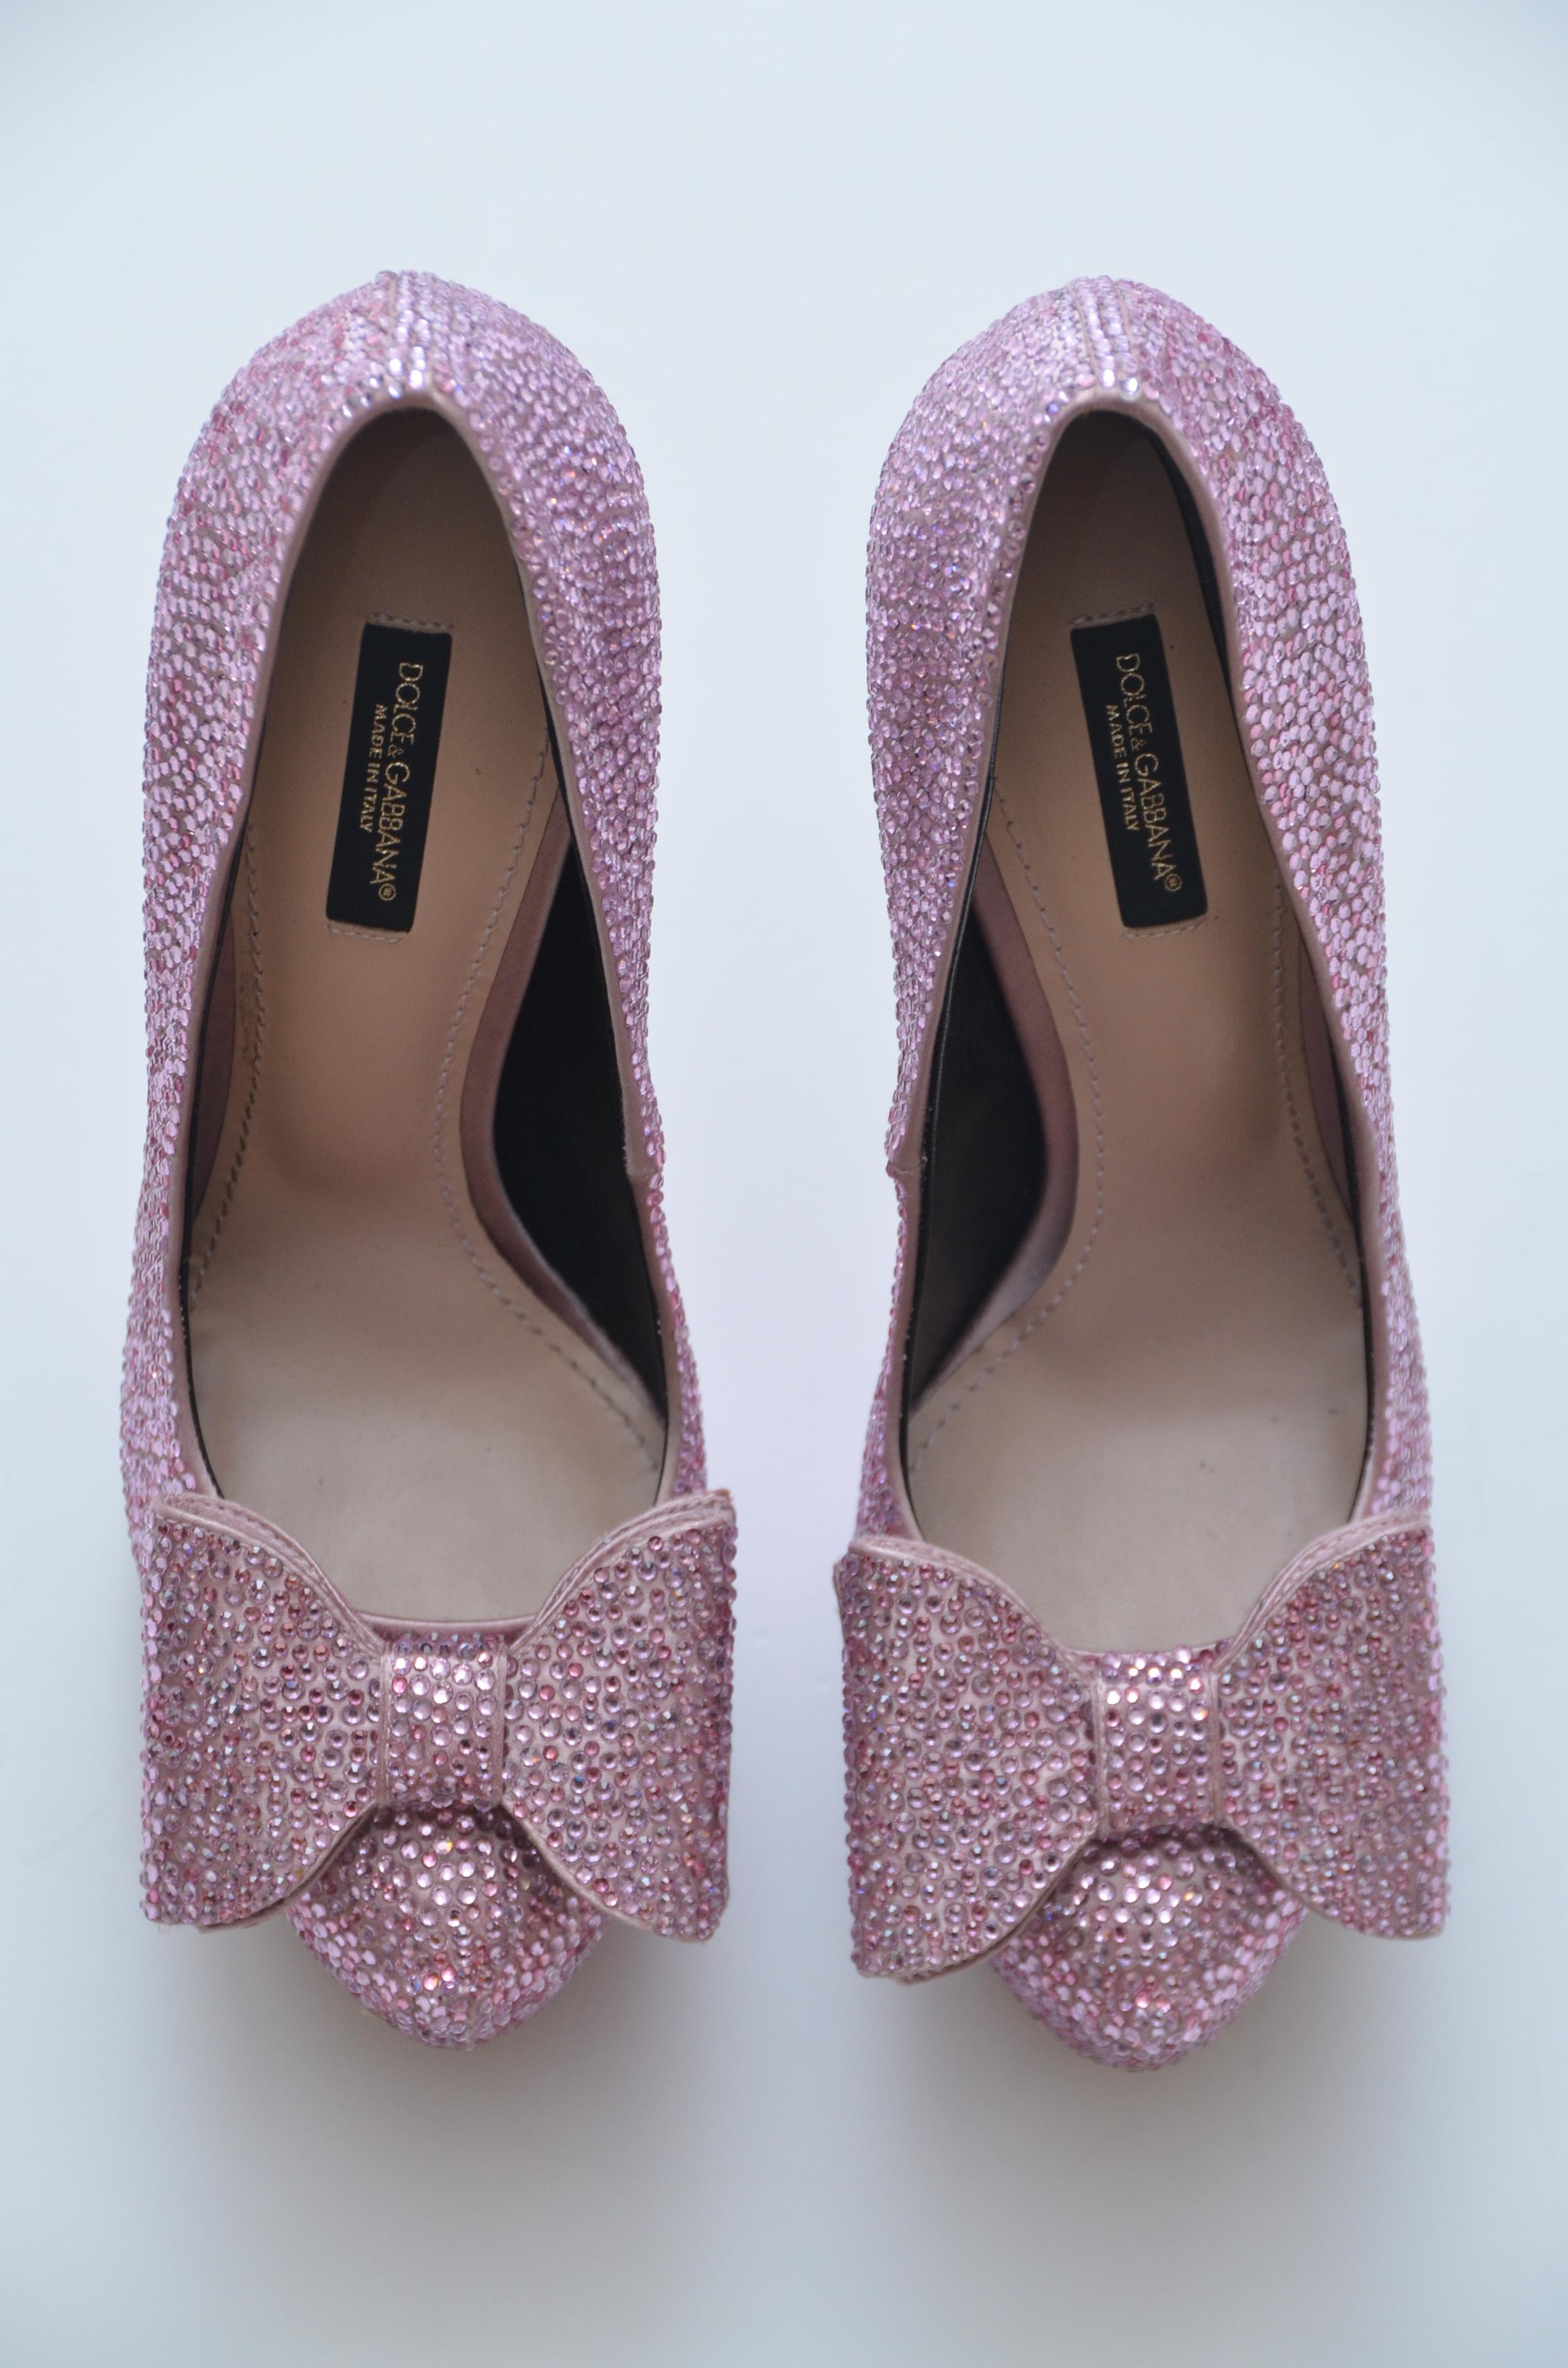 Dolce & Gabbana Swarovski Pink Strass  Embelished Shoes  
Size  37  
NEW with original box.

Please know your sizing in this designer since this is FINAL SALE.

FINAL SALE.